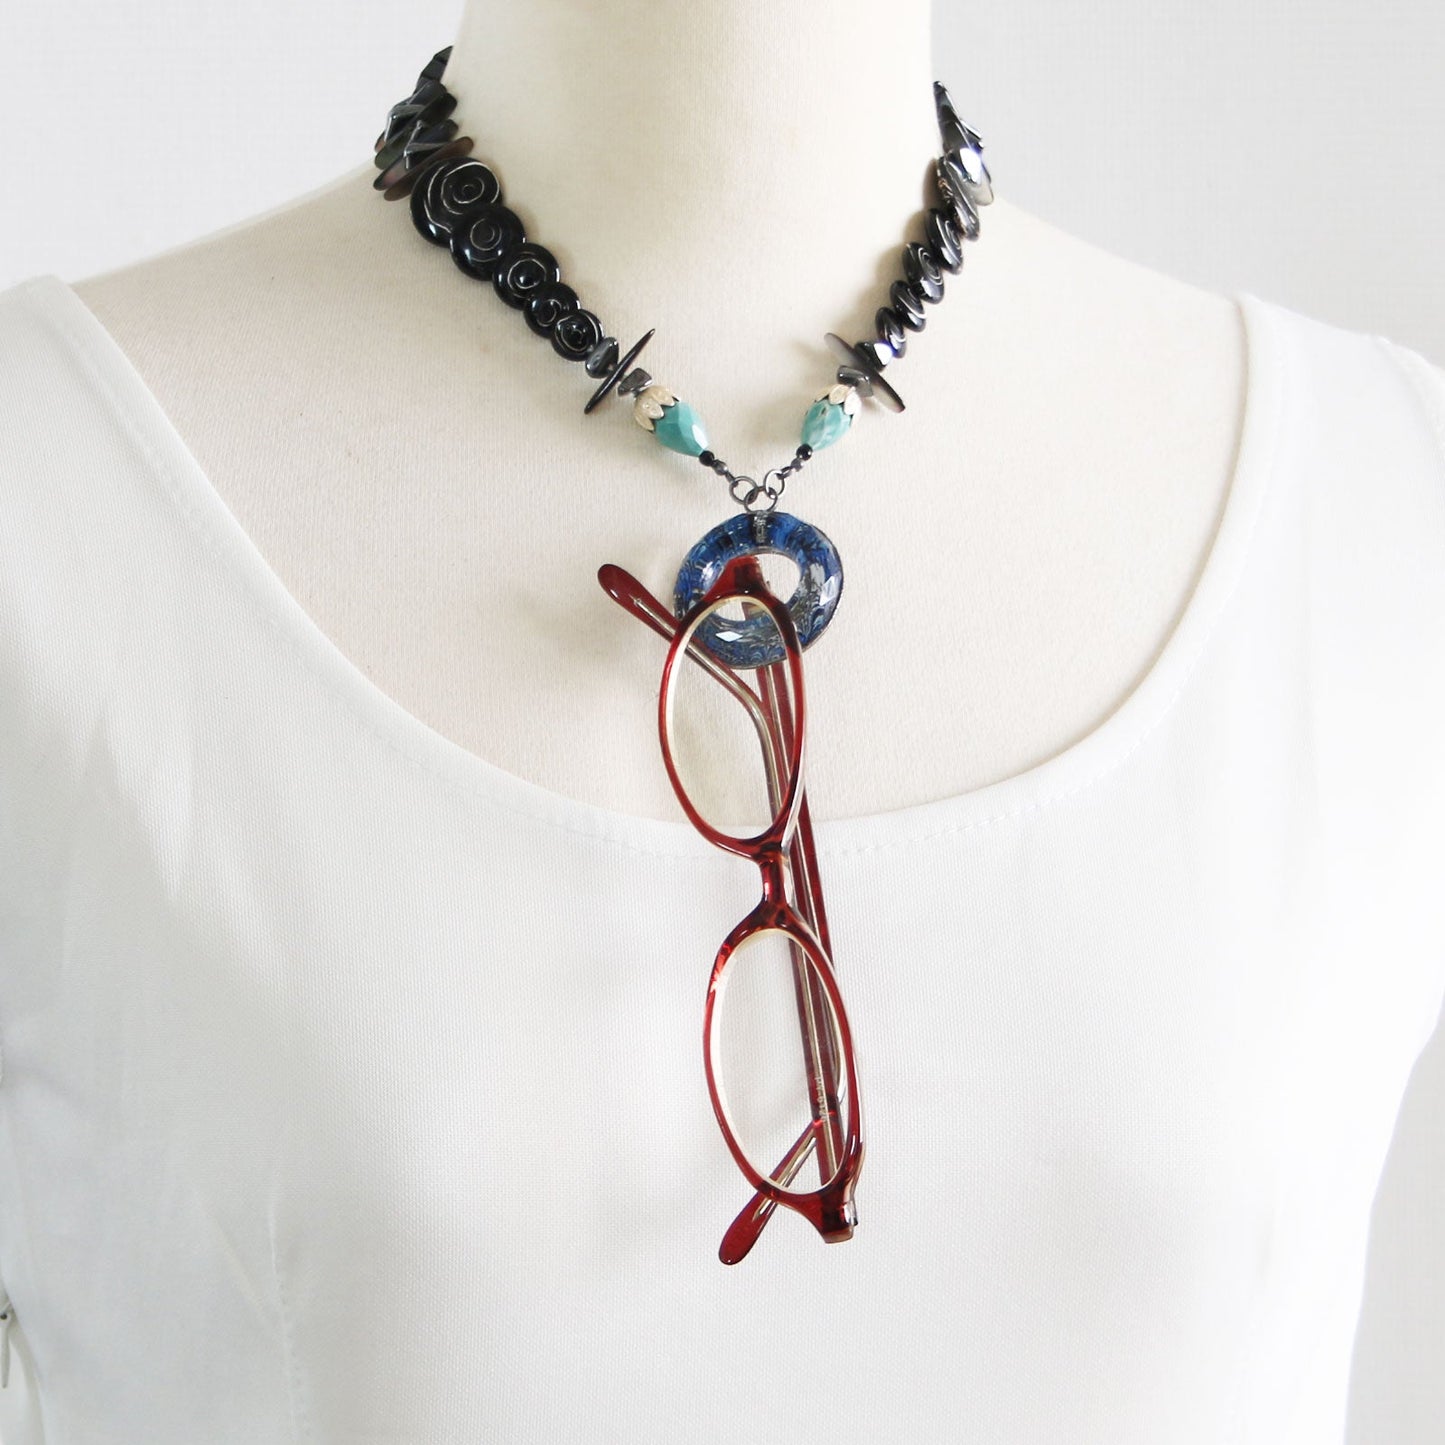 Eyeglass Holder Necklace Coral Turquoise Blue TAMARUSAN